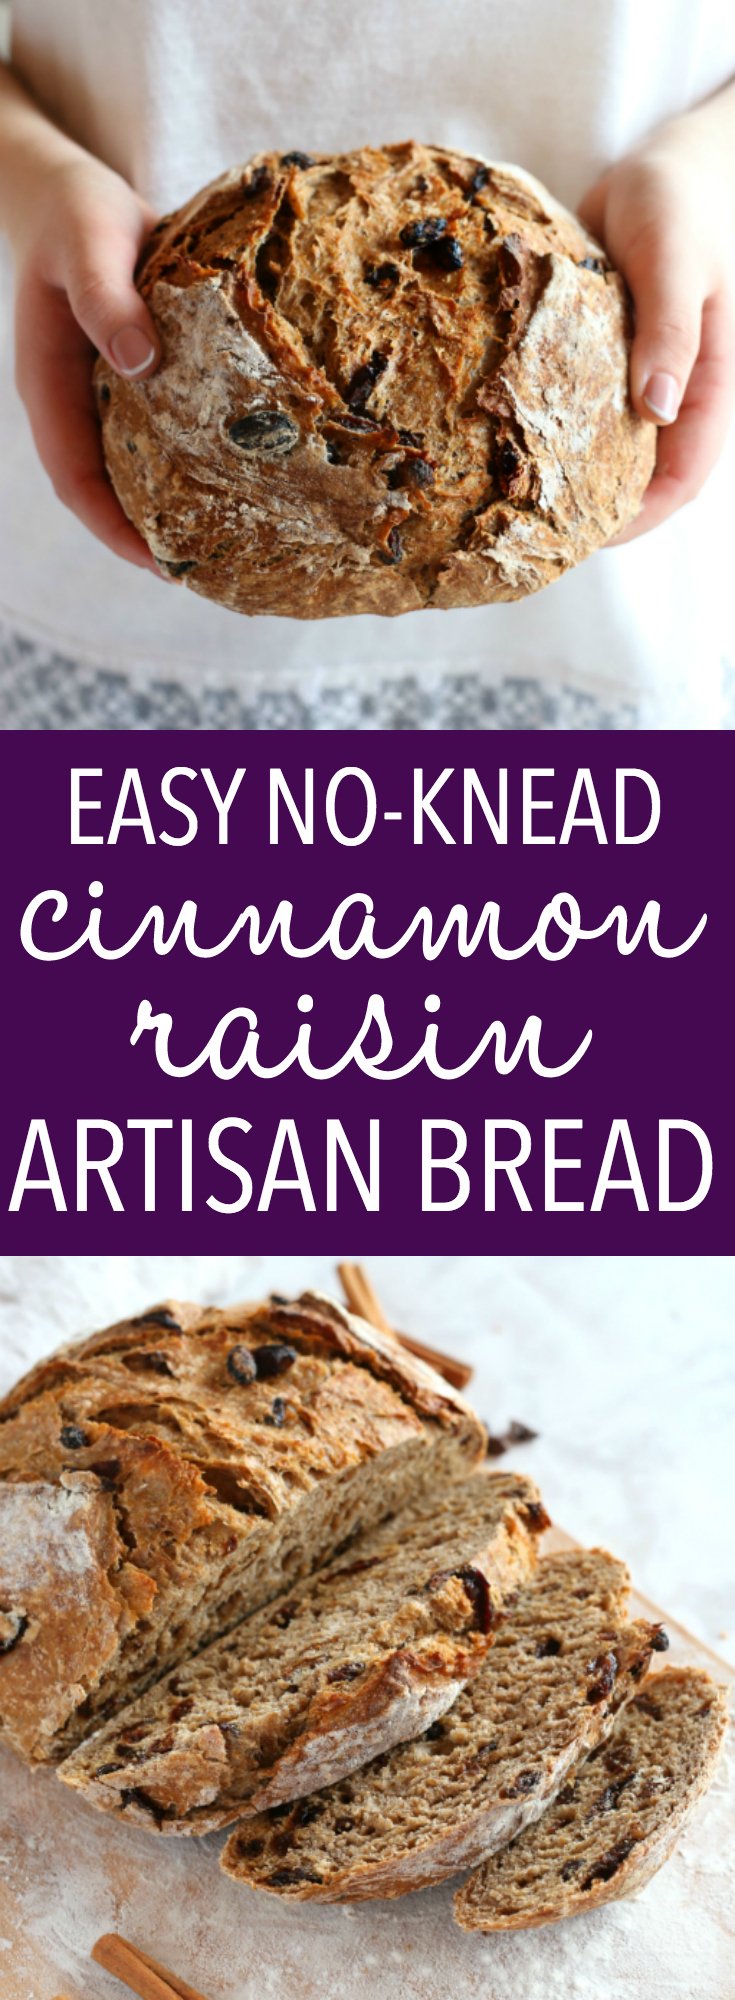 This Easy No Knead Cinnamon Raisin Artisan Bread is crusty on the outside, tender and fluffy on the inside and packed with sweet cinnamon flavour and juicy raisins. And it's SO easy to make this bakery-style loaf at home in your own kitchen! Recipe from thebusybaker.ca! #bakerybread #nokneadbread #artisanbread #bestcinnamonraisinbread via @busybakerblog